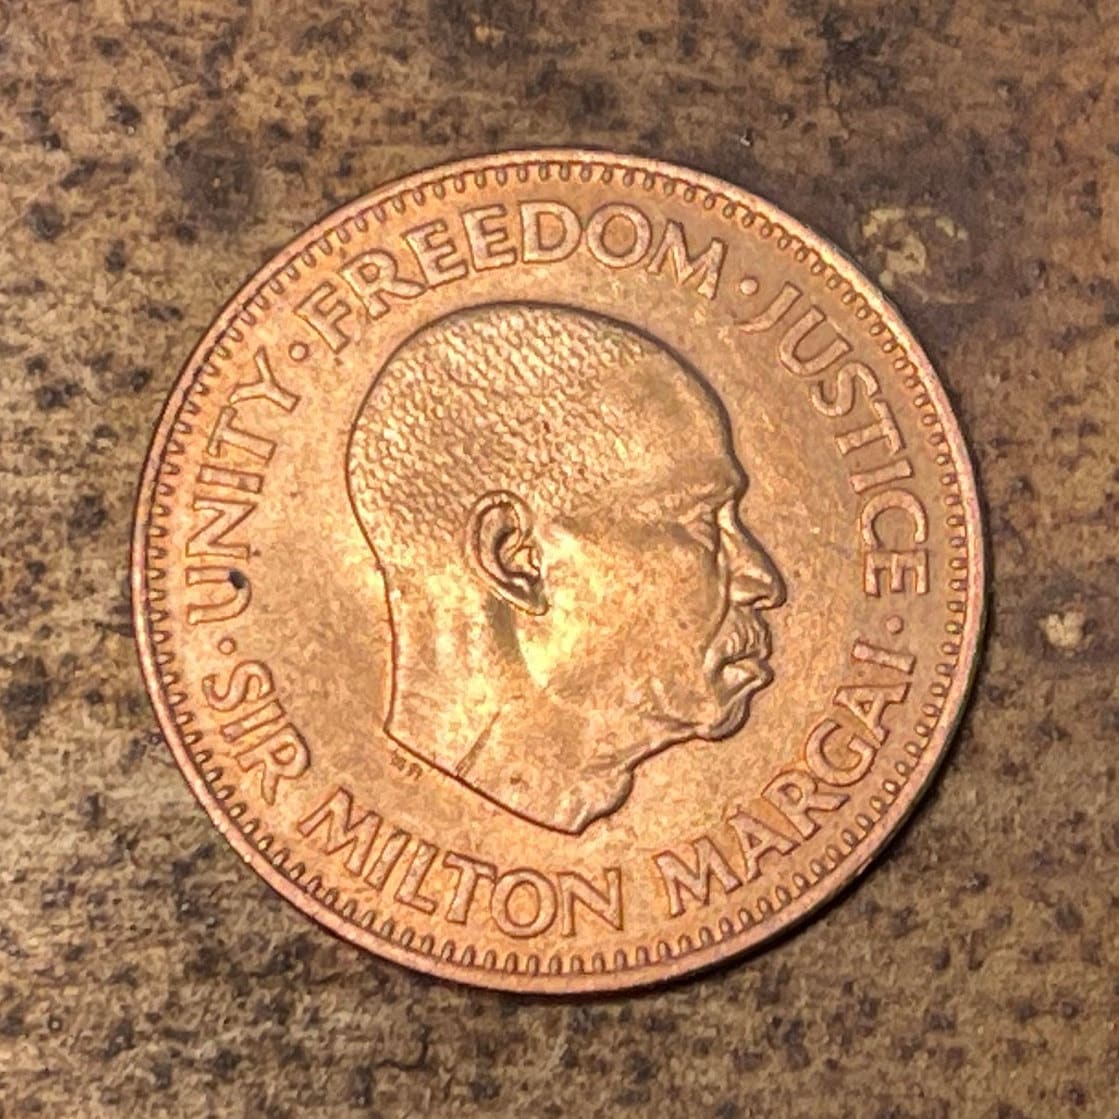 Bonga Shad & Sir Milton Margai 1/2 Cent Sierra Leone Authentic Coin Money for Jewelry and Craft Making (1964)